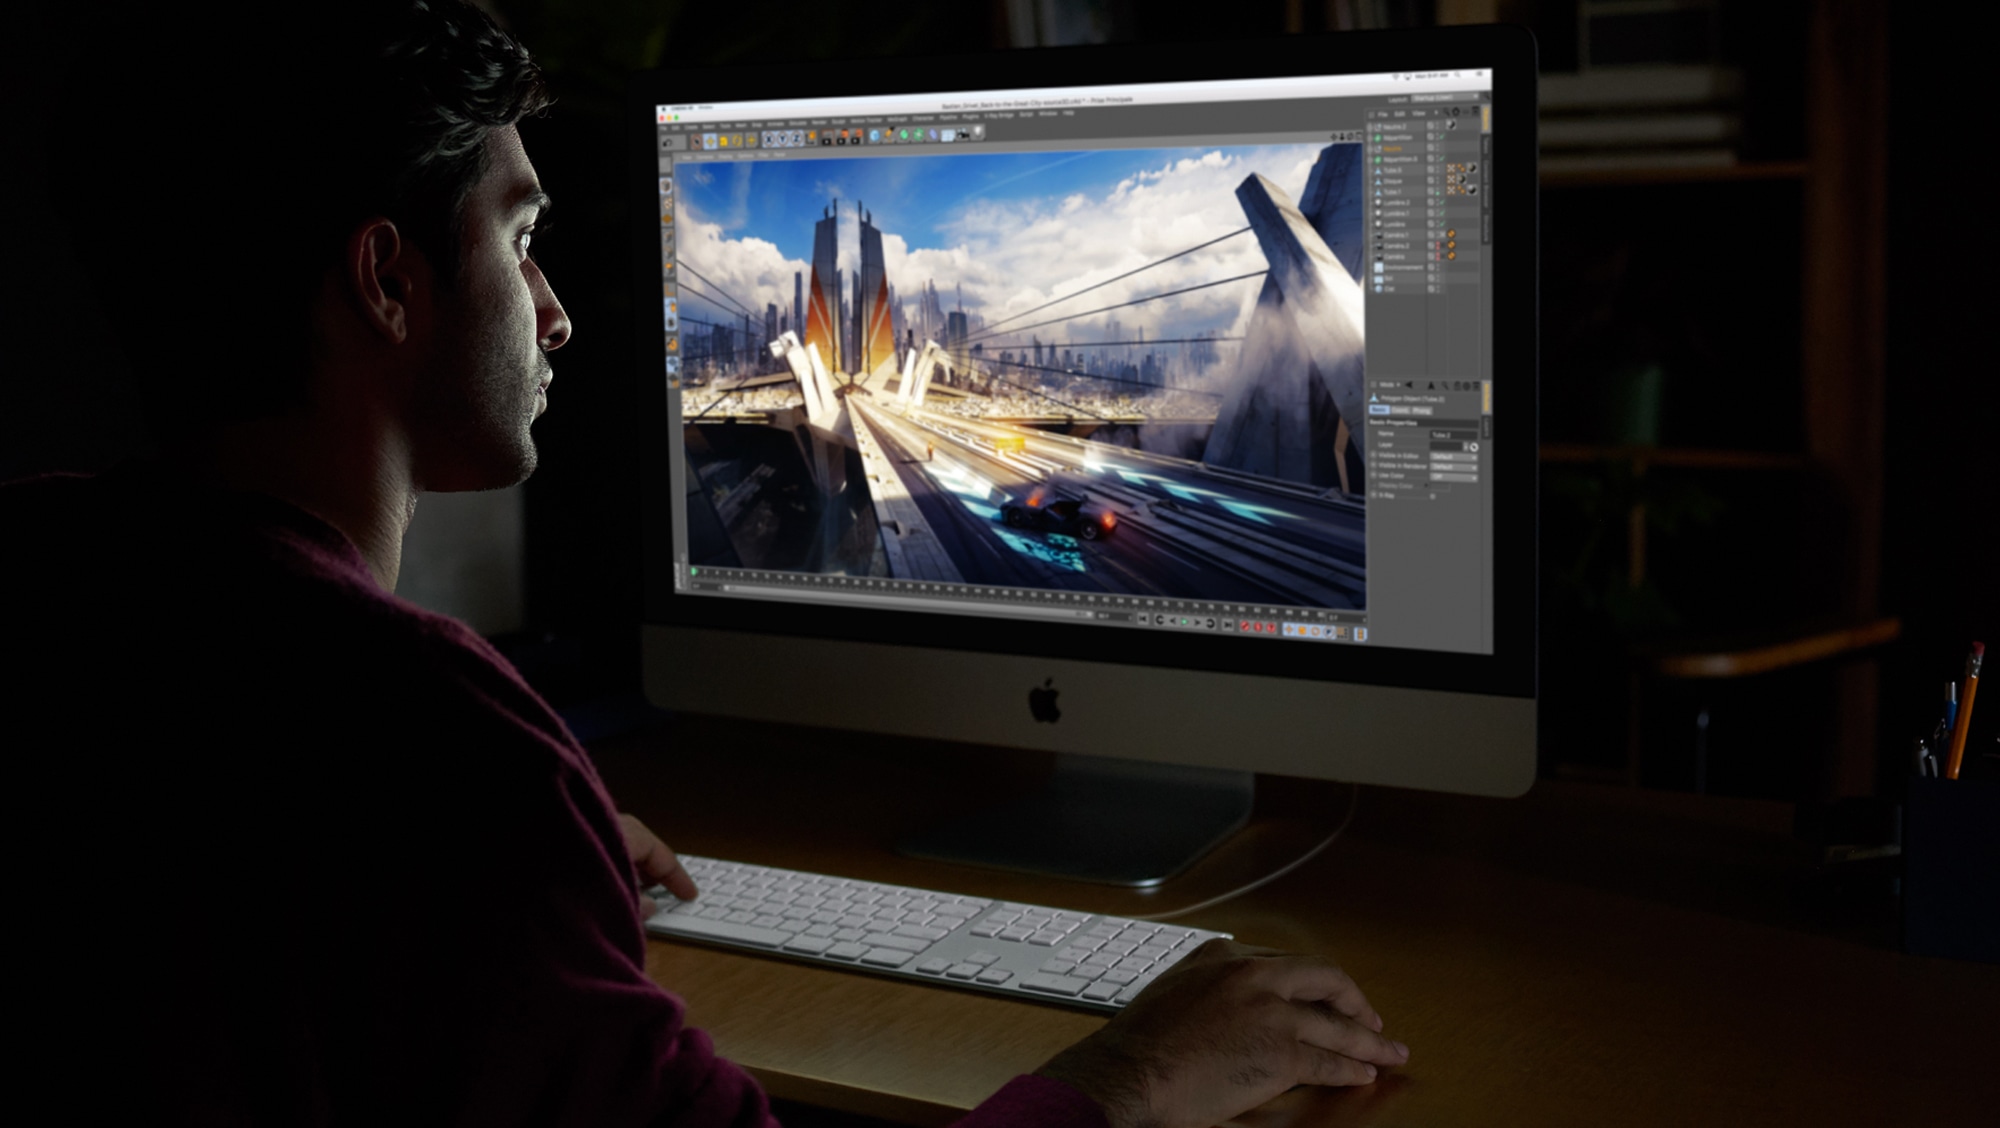 iMac Pro being used in the dark